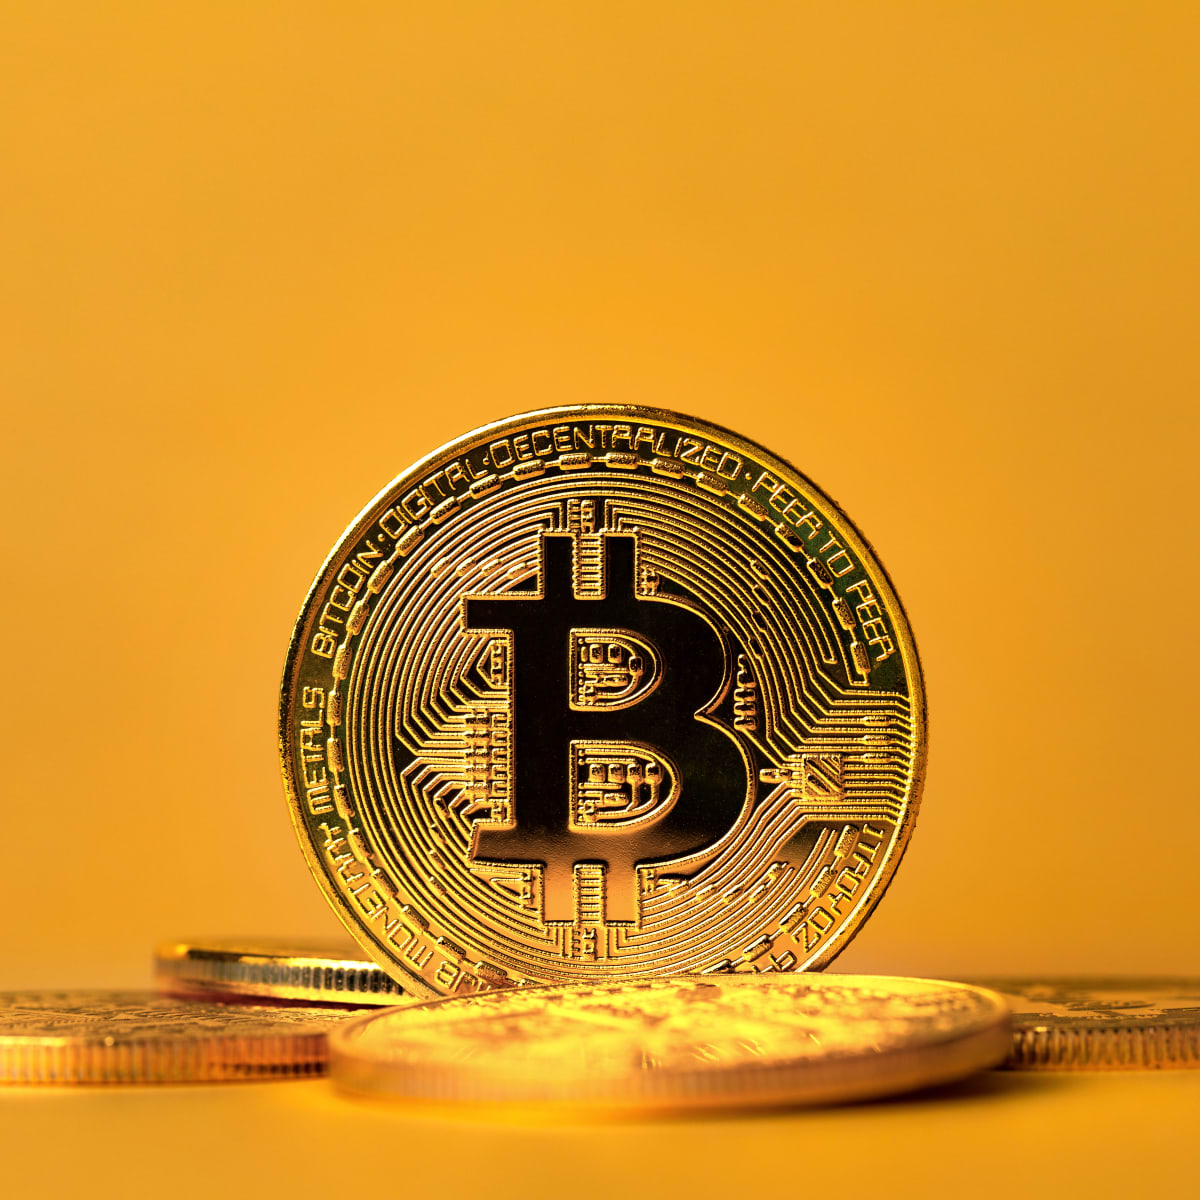 BRC20.com sale nets record 21 bitcoin as new crypto ecosystem approaches  $1.5 billion - TheStreet Crypto: Bitcoin and cryptocurrency news, advice,  analysis and more